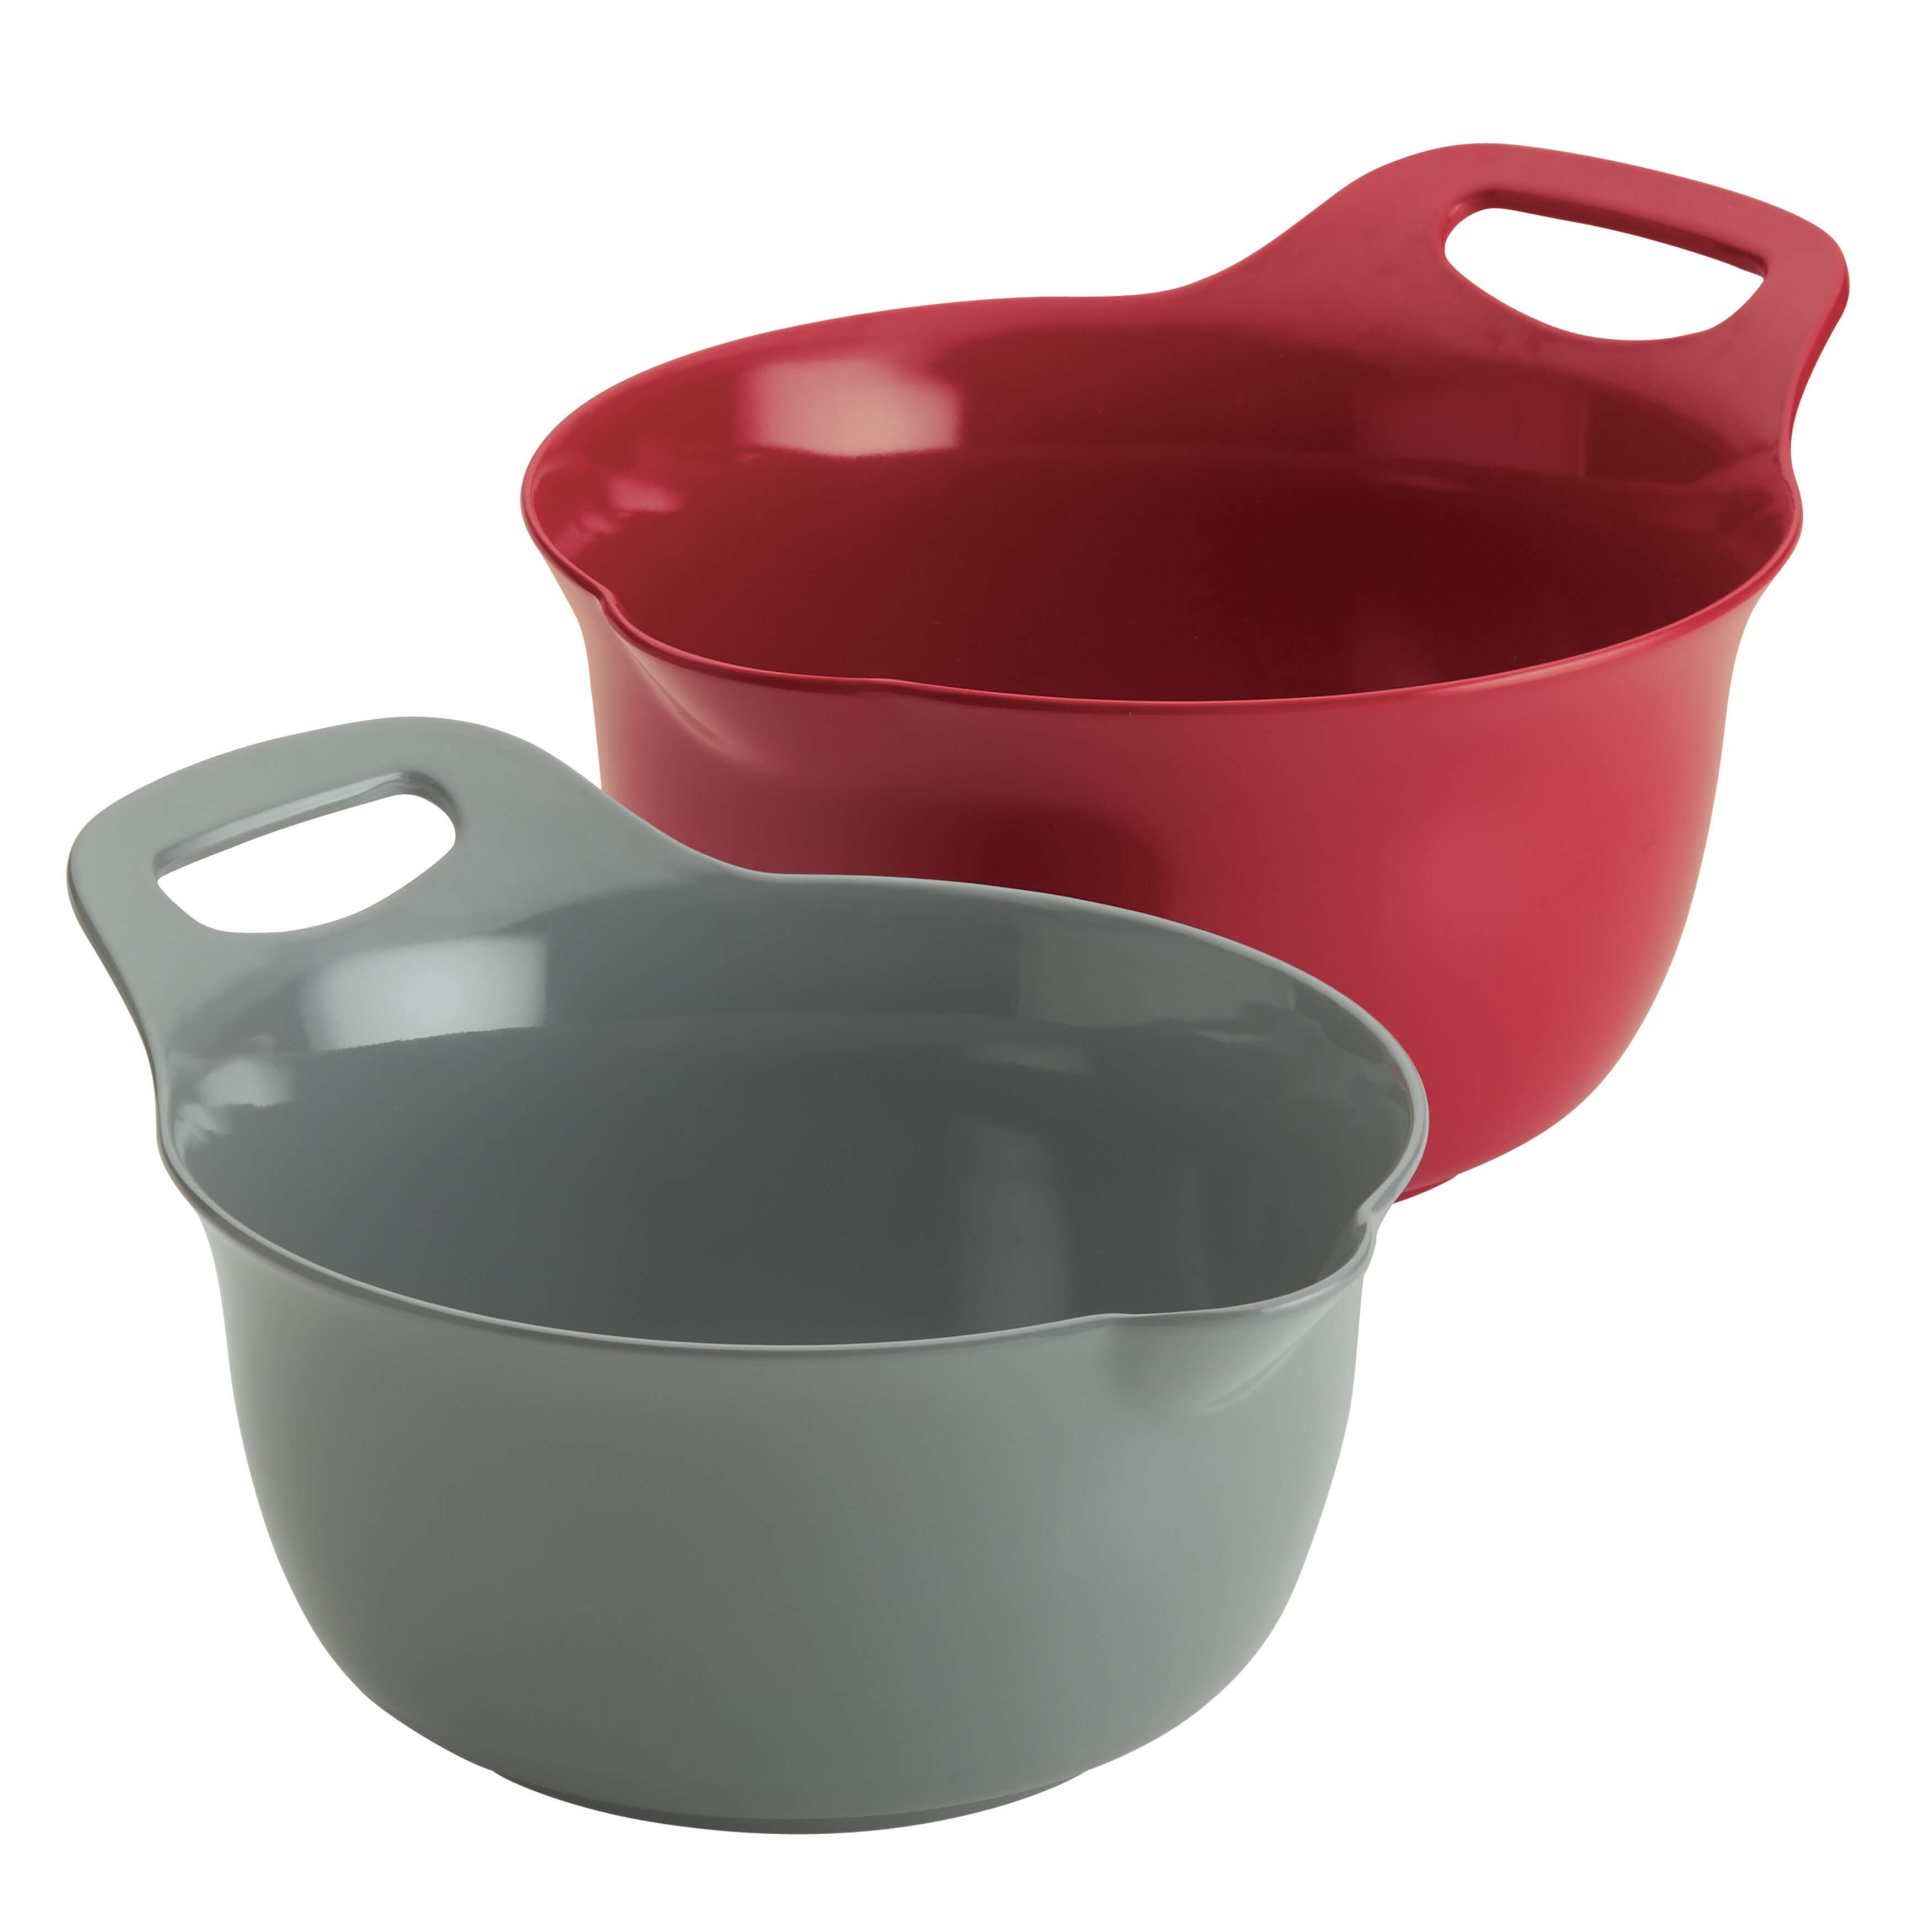 Hutzler 3-red Small Melamine Nesting Prep Bowls with Lids (2-Pack)